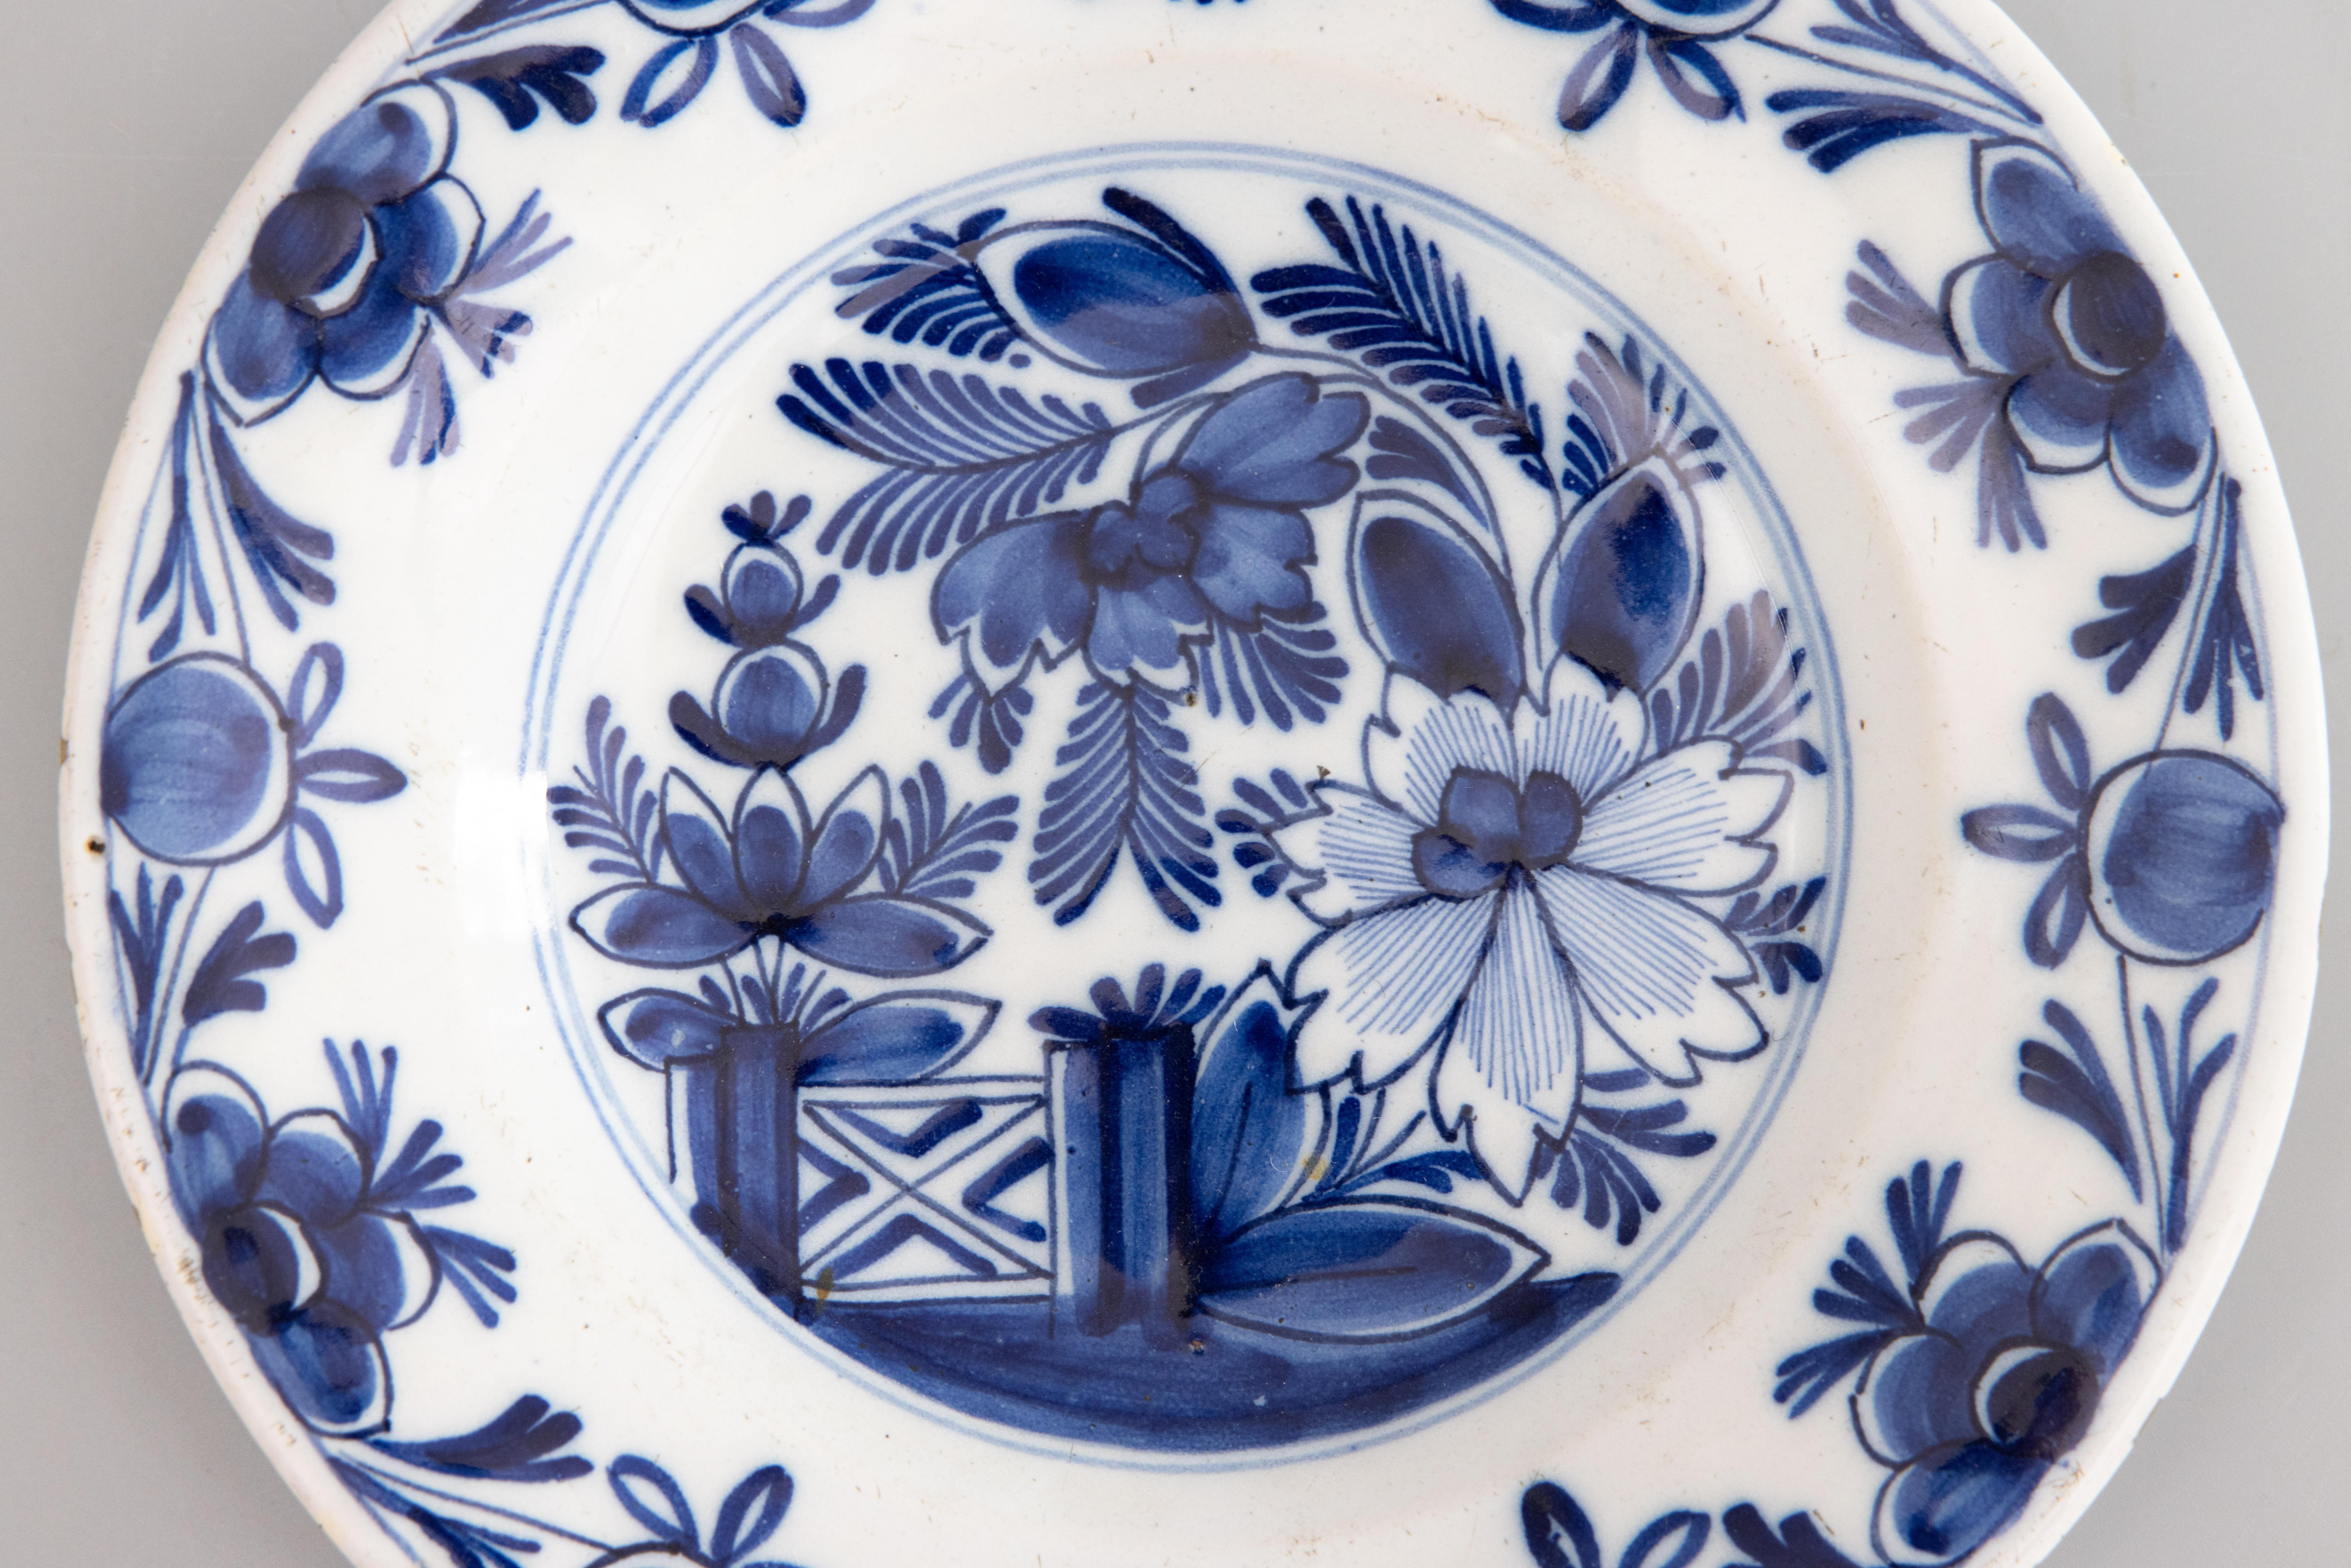 A beautiful antique Delft plate featuring a striking floral design and garden gate in the center, surrounded by a floral motif on the border. All hand painted in vibrant cobalt blue.

DIMENSIONS
9.25ʺW × 1.38ʺD × 9.25ʺH